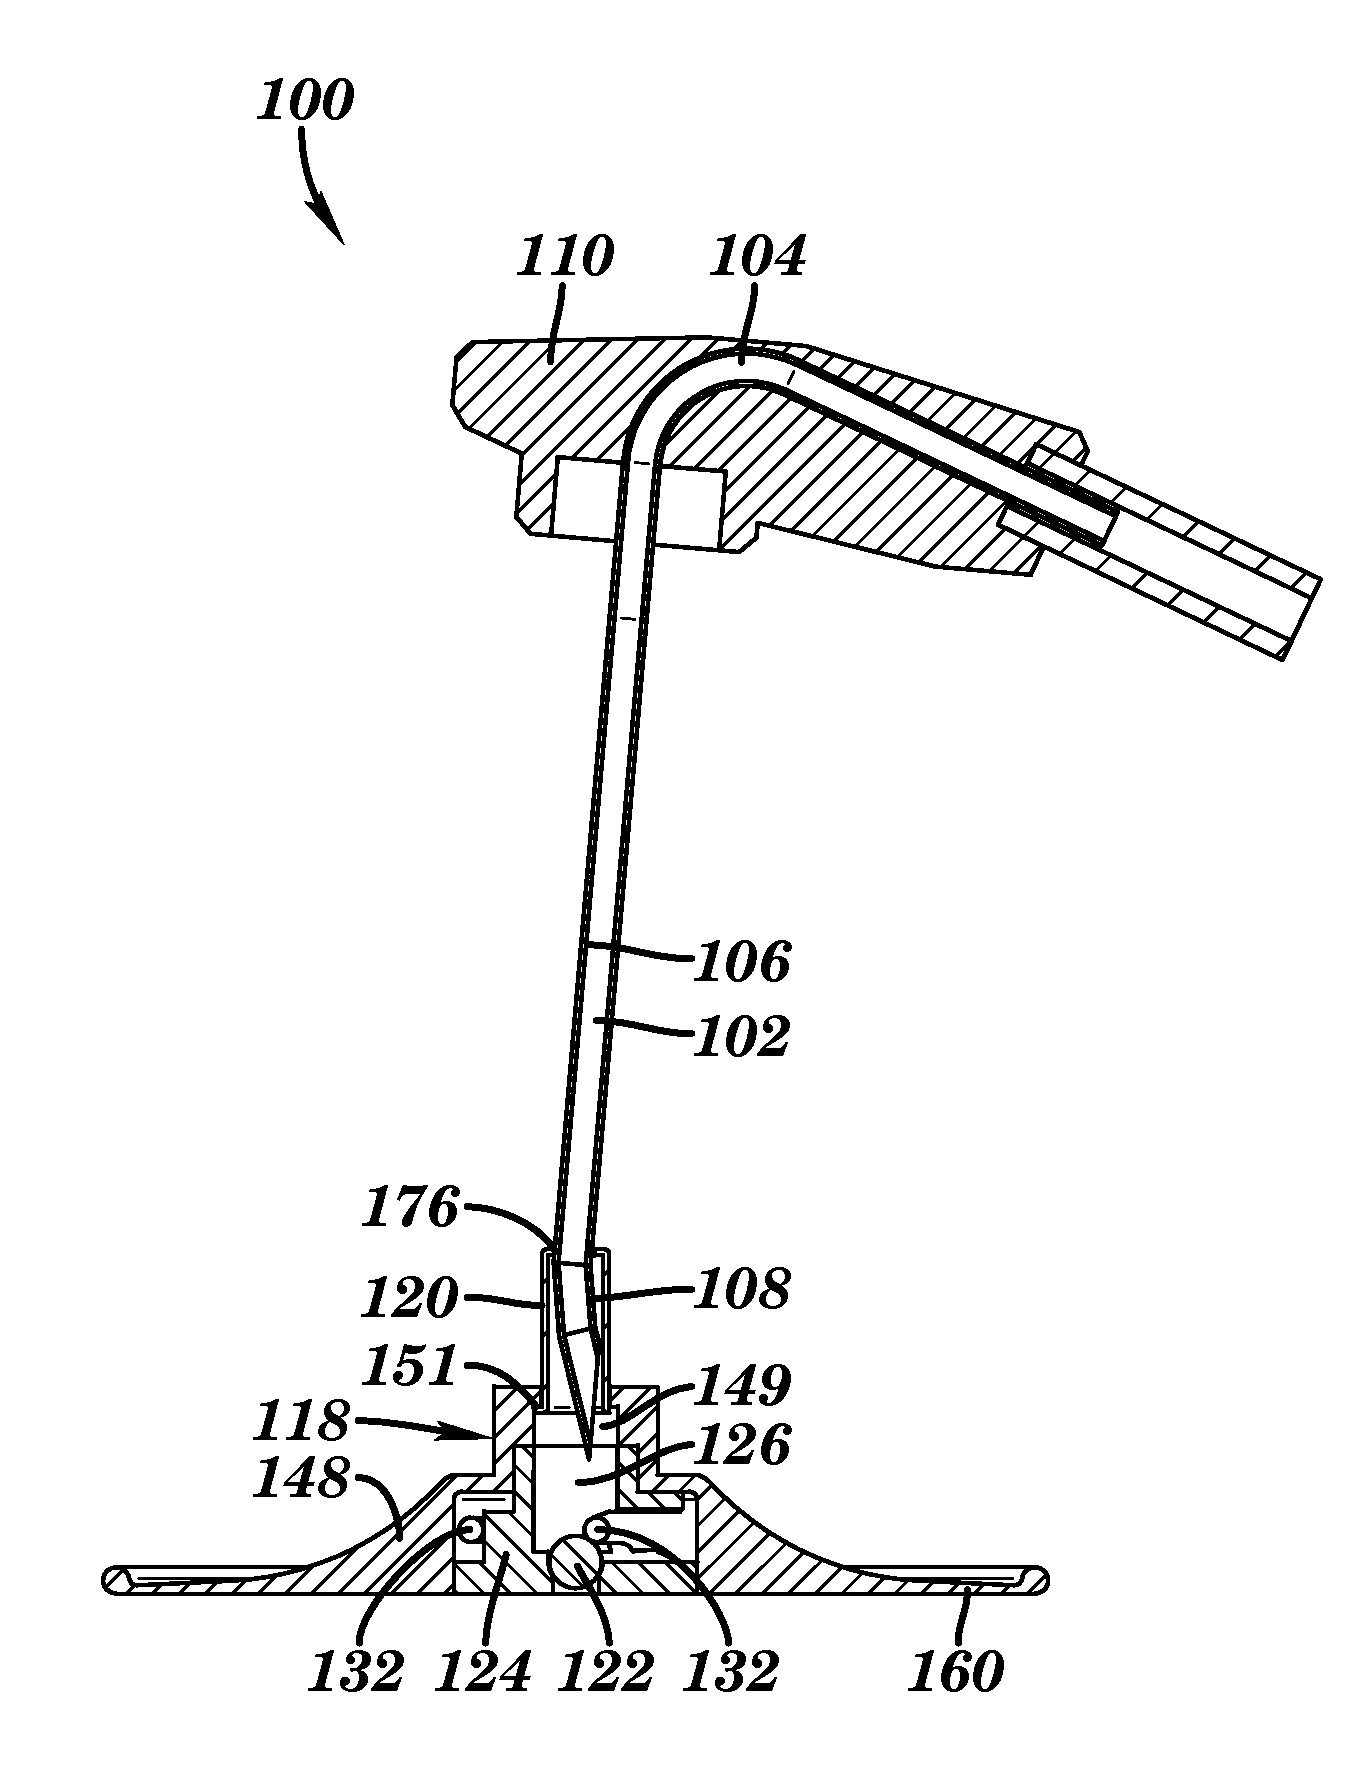 Needle-based medical device and related method